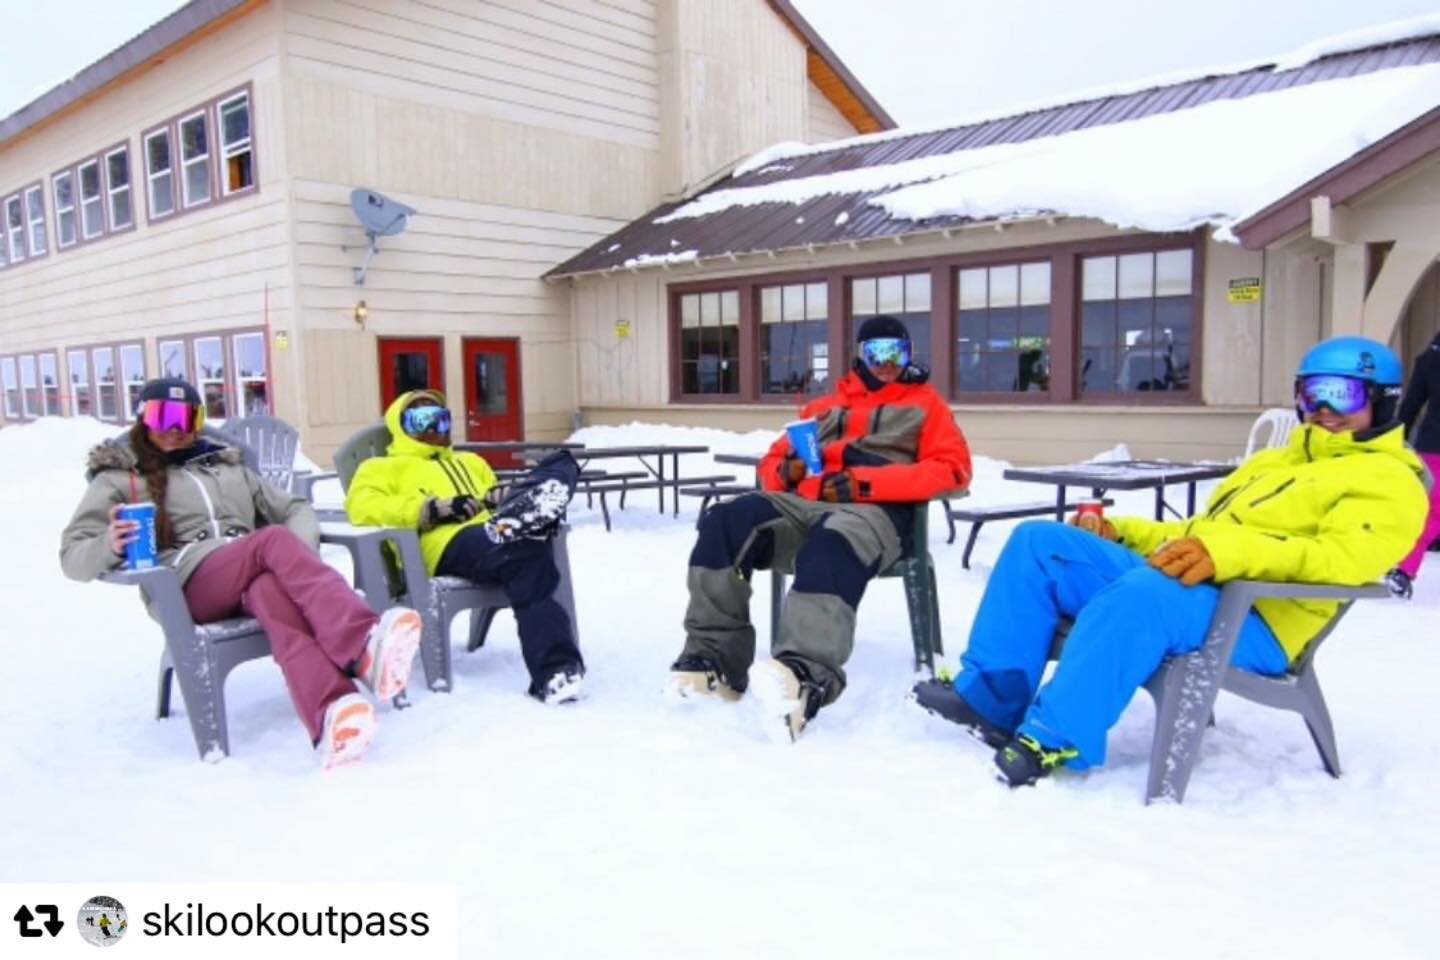 #Repost @skilookoutpass with @repostsaveapp 
 &middot; &middot; &middot; 
 Come pick up your SEASON PASS or buy it at @skishack Hayden Sat. Nov 7th 11am to 4pm! 
At @Gull_Ski Missoula, MT Thurs. Nov. 12 11am to 5pm or at 
@tristate_outfitters CDA, ID